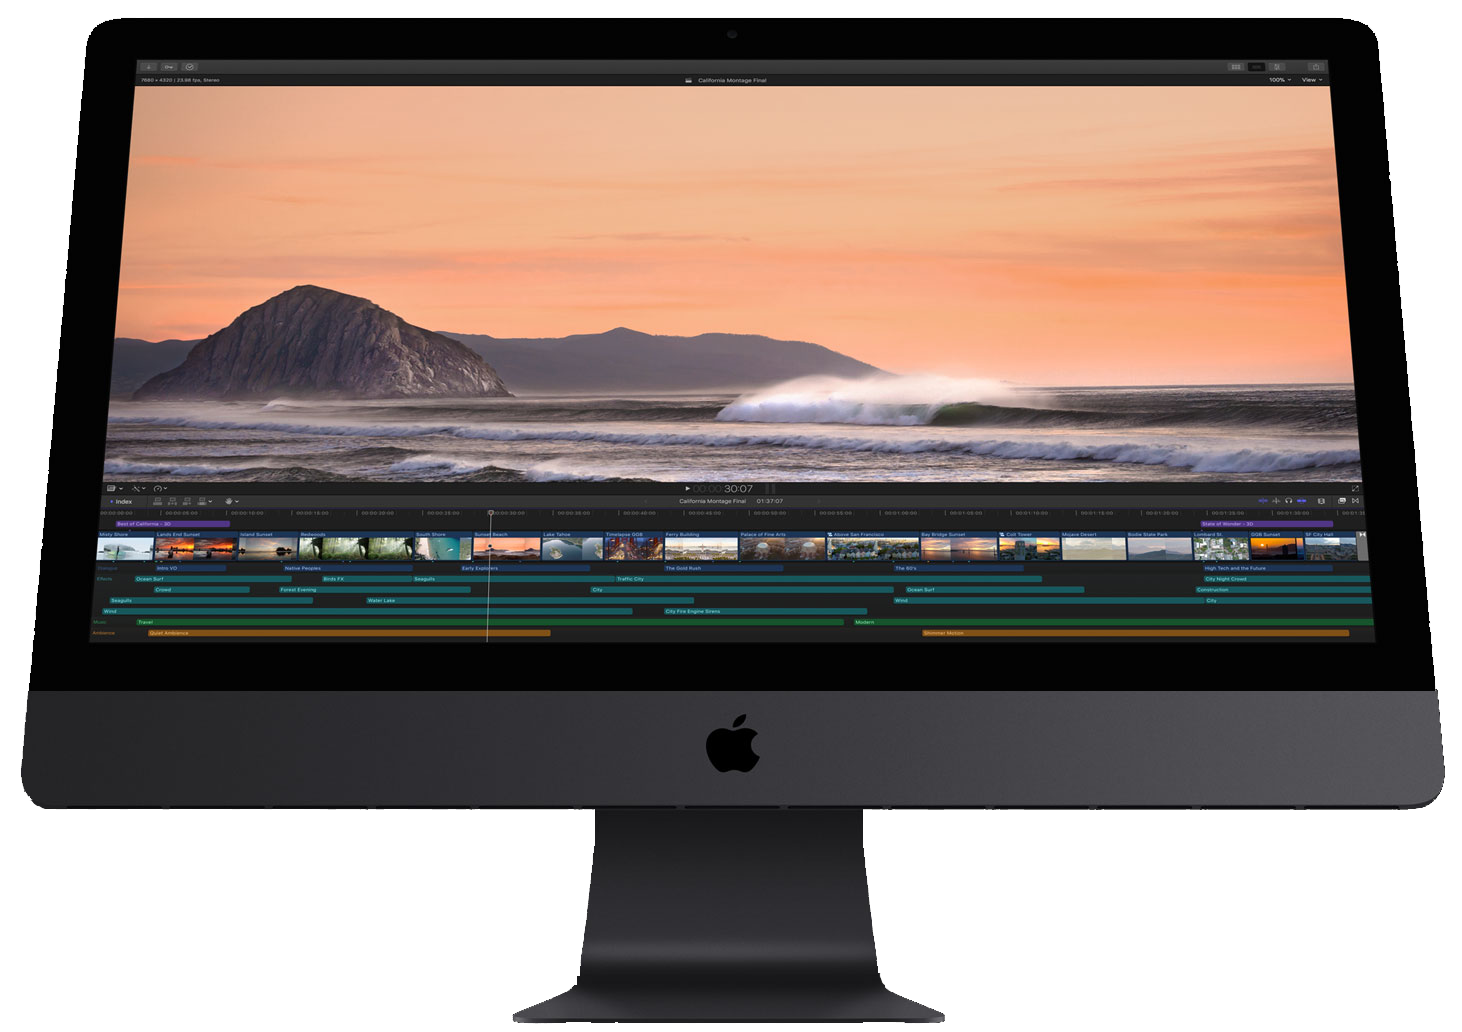 imovie for mac 10.13 6 download